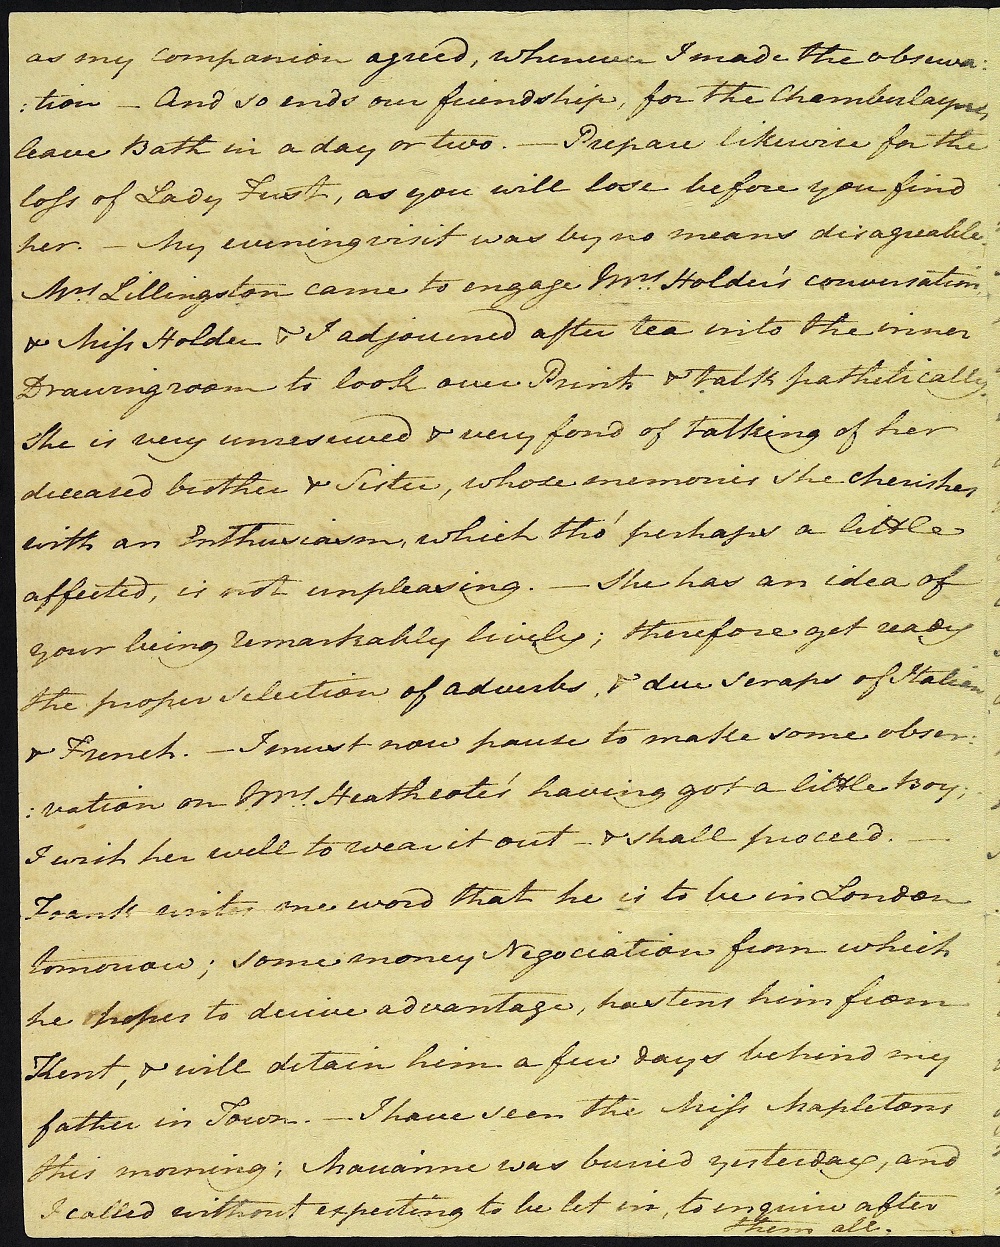 Letter from Jane Austen to Cassandra Austen, Tuesday 26th - Wednesday 27th May 1801. Page 2